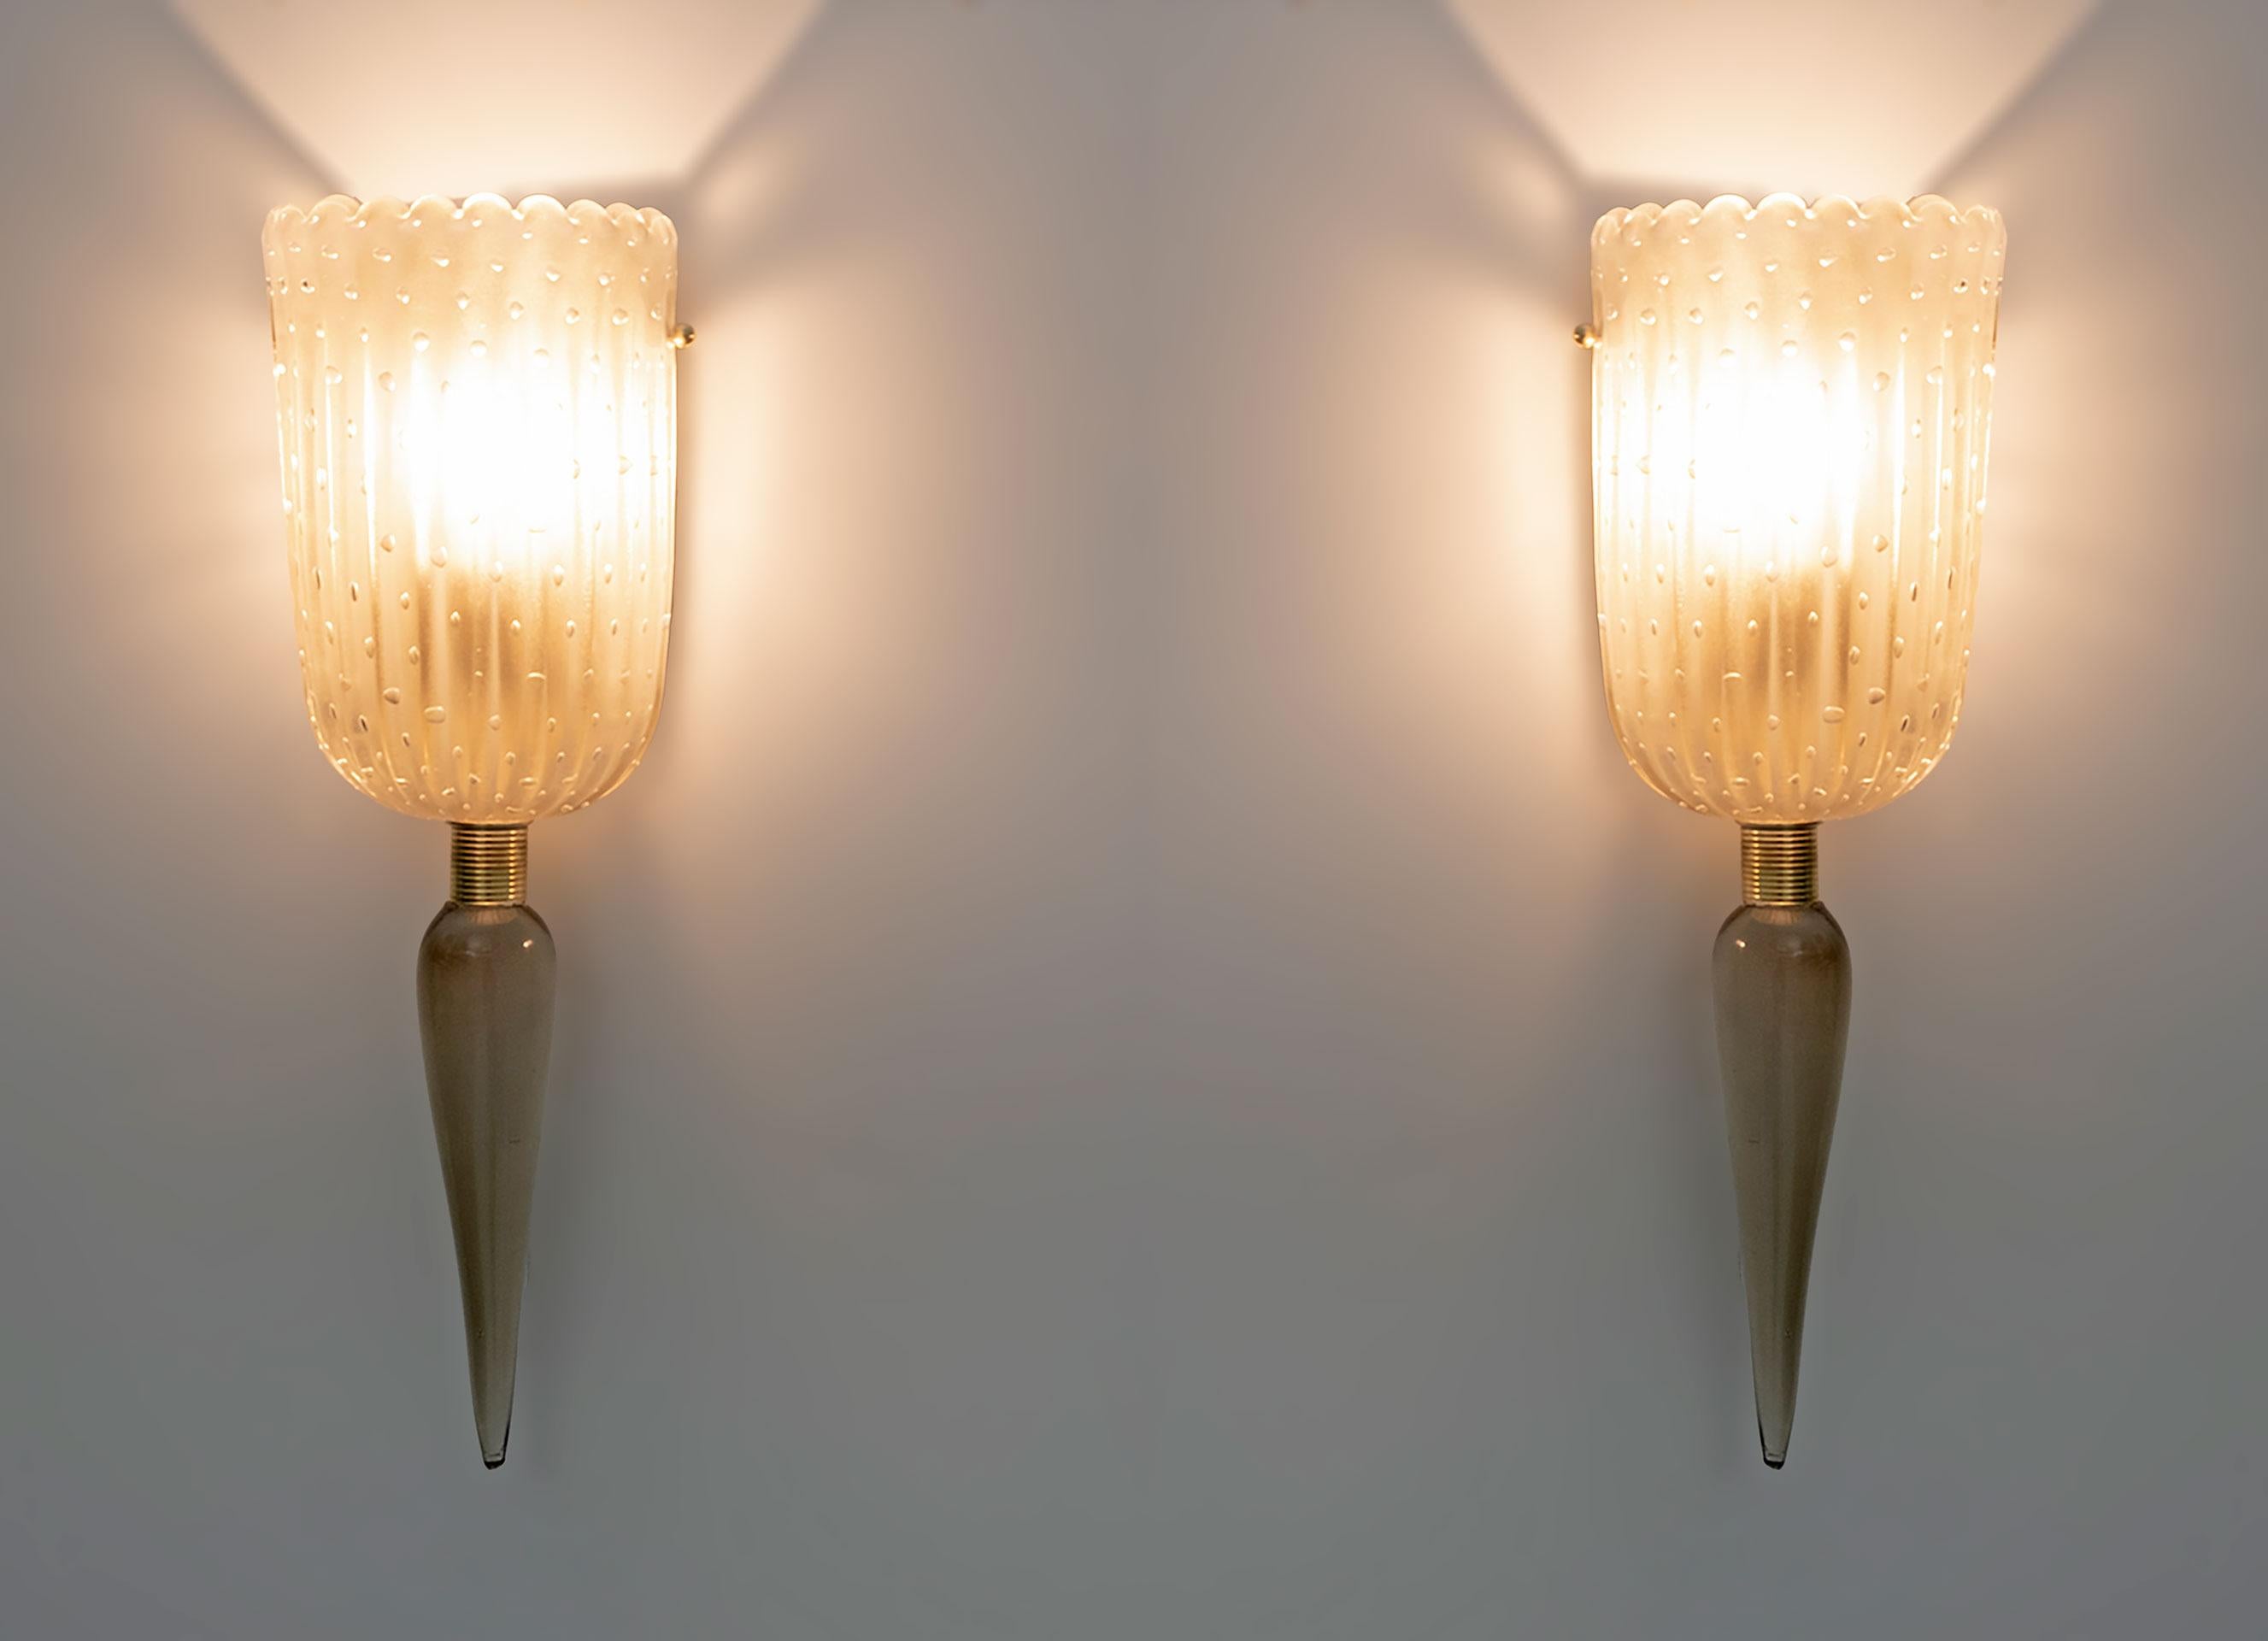 Pair of Mid-Century Modern Murano glass sconces, attributed to Barovier & Toso, Italy, 1980s. The wall lights have brass supports; Murano glass is worked with the technique of inclusion of air bubbles. The sconces have one light each and can be